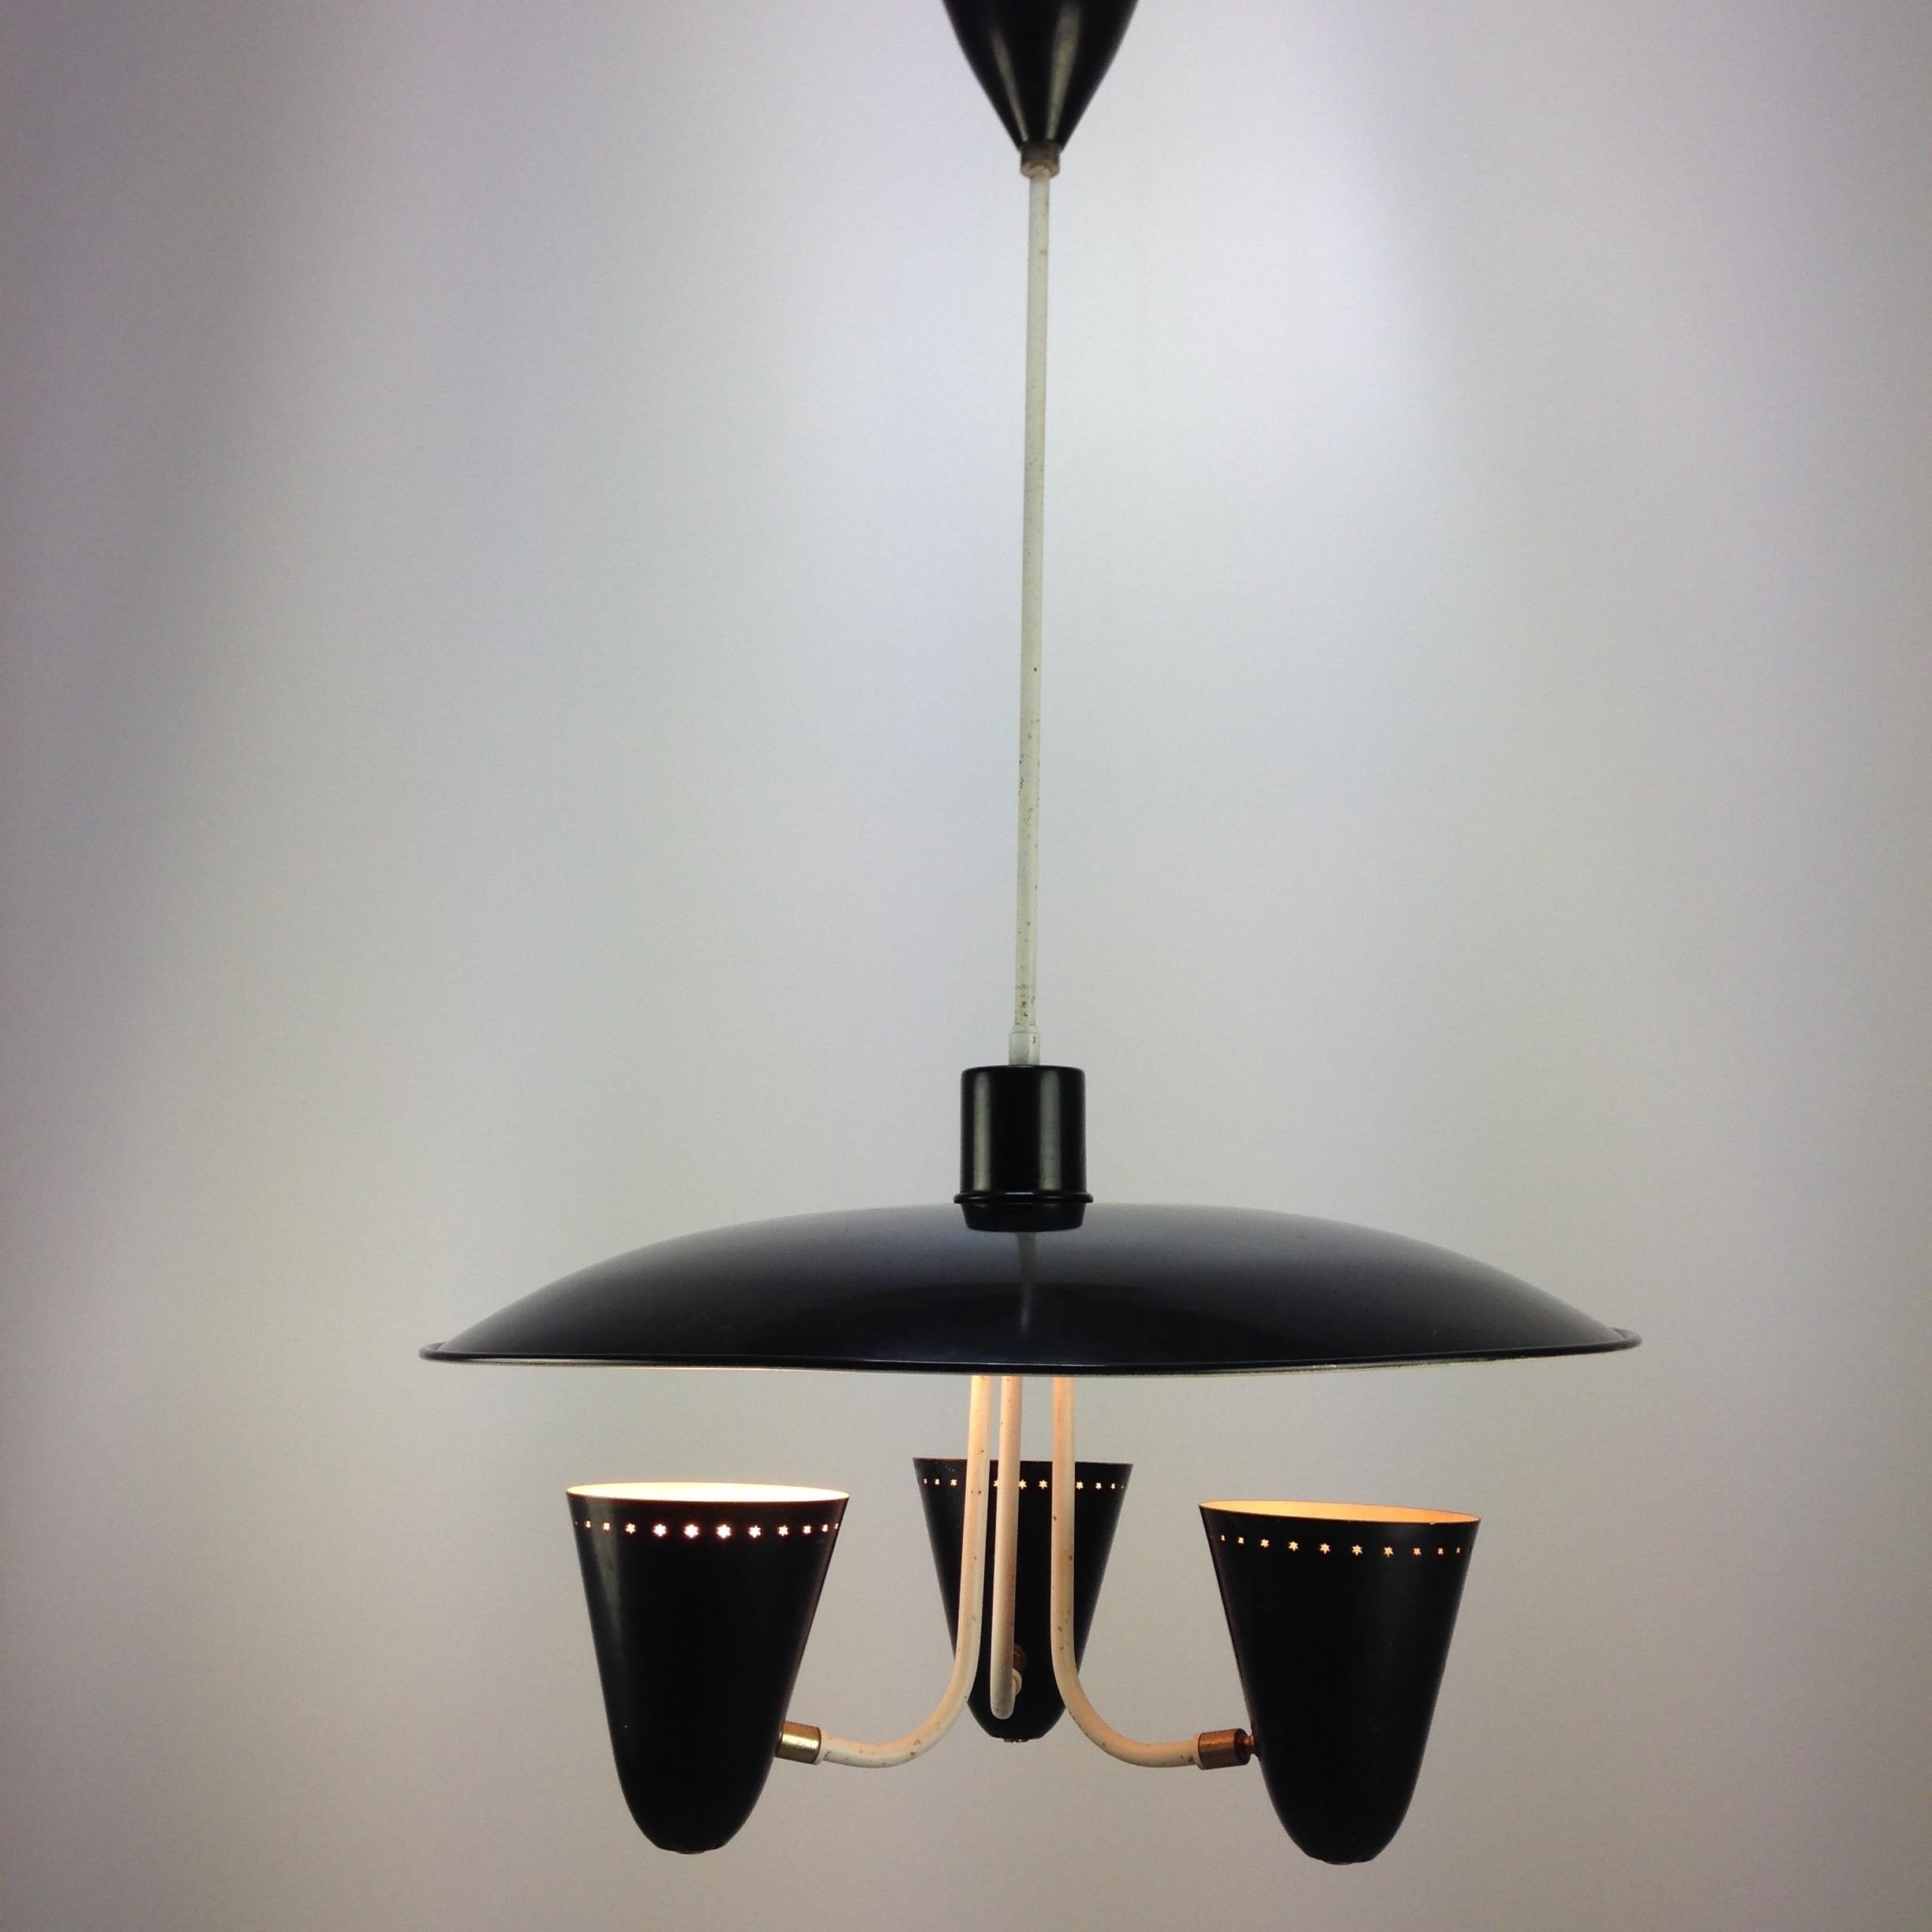 Very nice and typical Dutch 1950s ceiling lamp designed by H. Busquet for Hala Zeist, Holland 1955. 

This nicely shaped ceiling lamp has a large black lacquered reflector dish with three shades underneath in black. 

The shades are adjustable